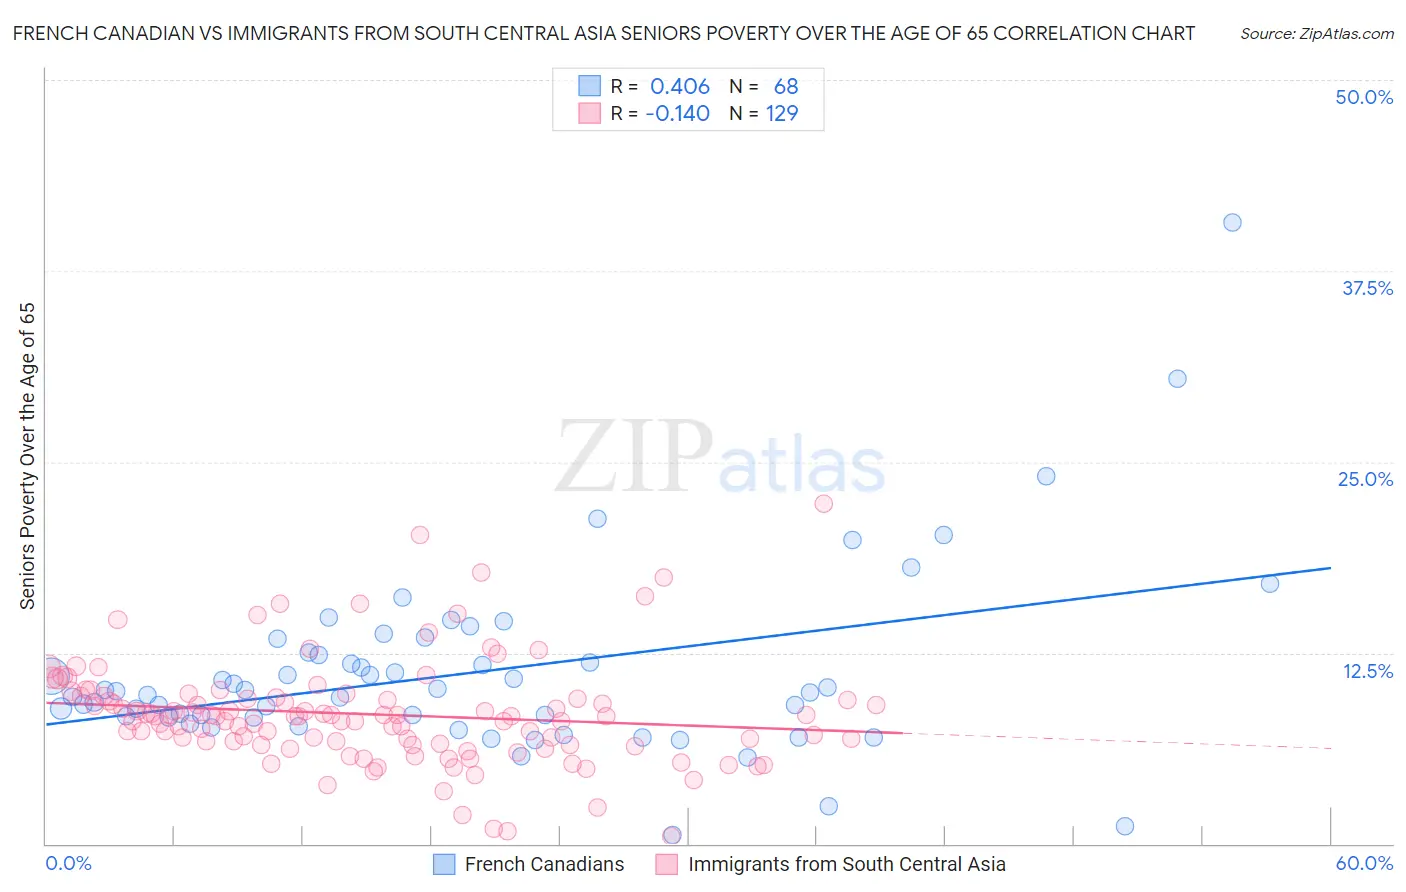 French Canadian vs Immigrants from South Central Asia Seniors Poverty Over the Age of 65